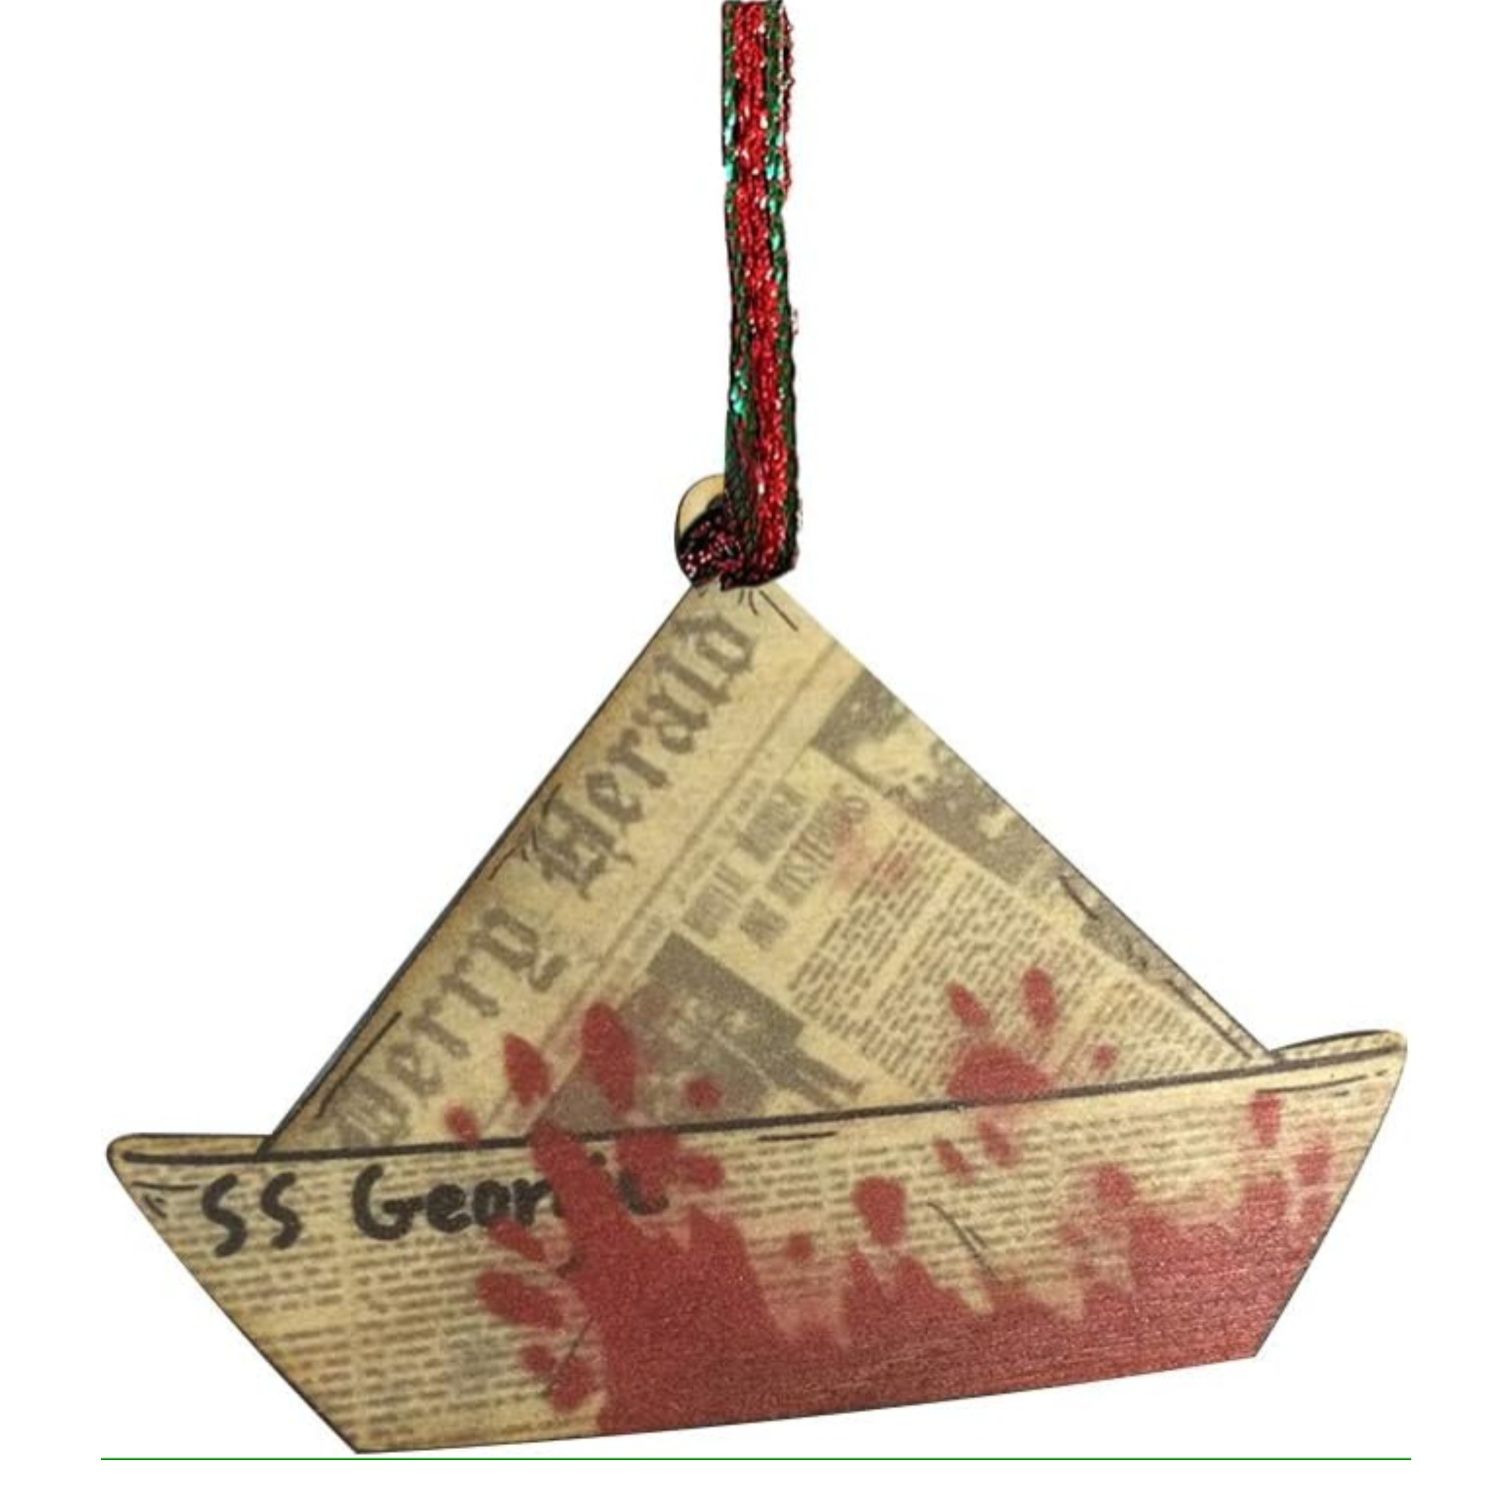 This ornament is a modeled after a paper boat that's splattered with blood.